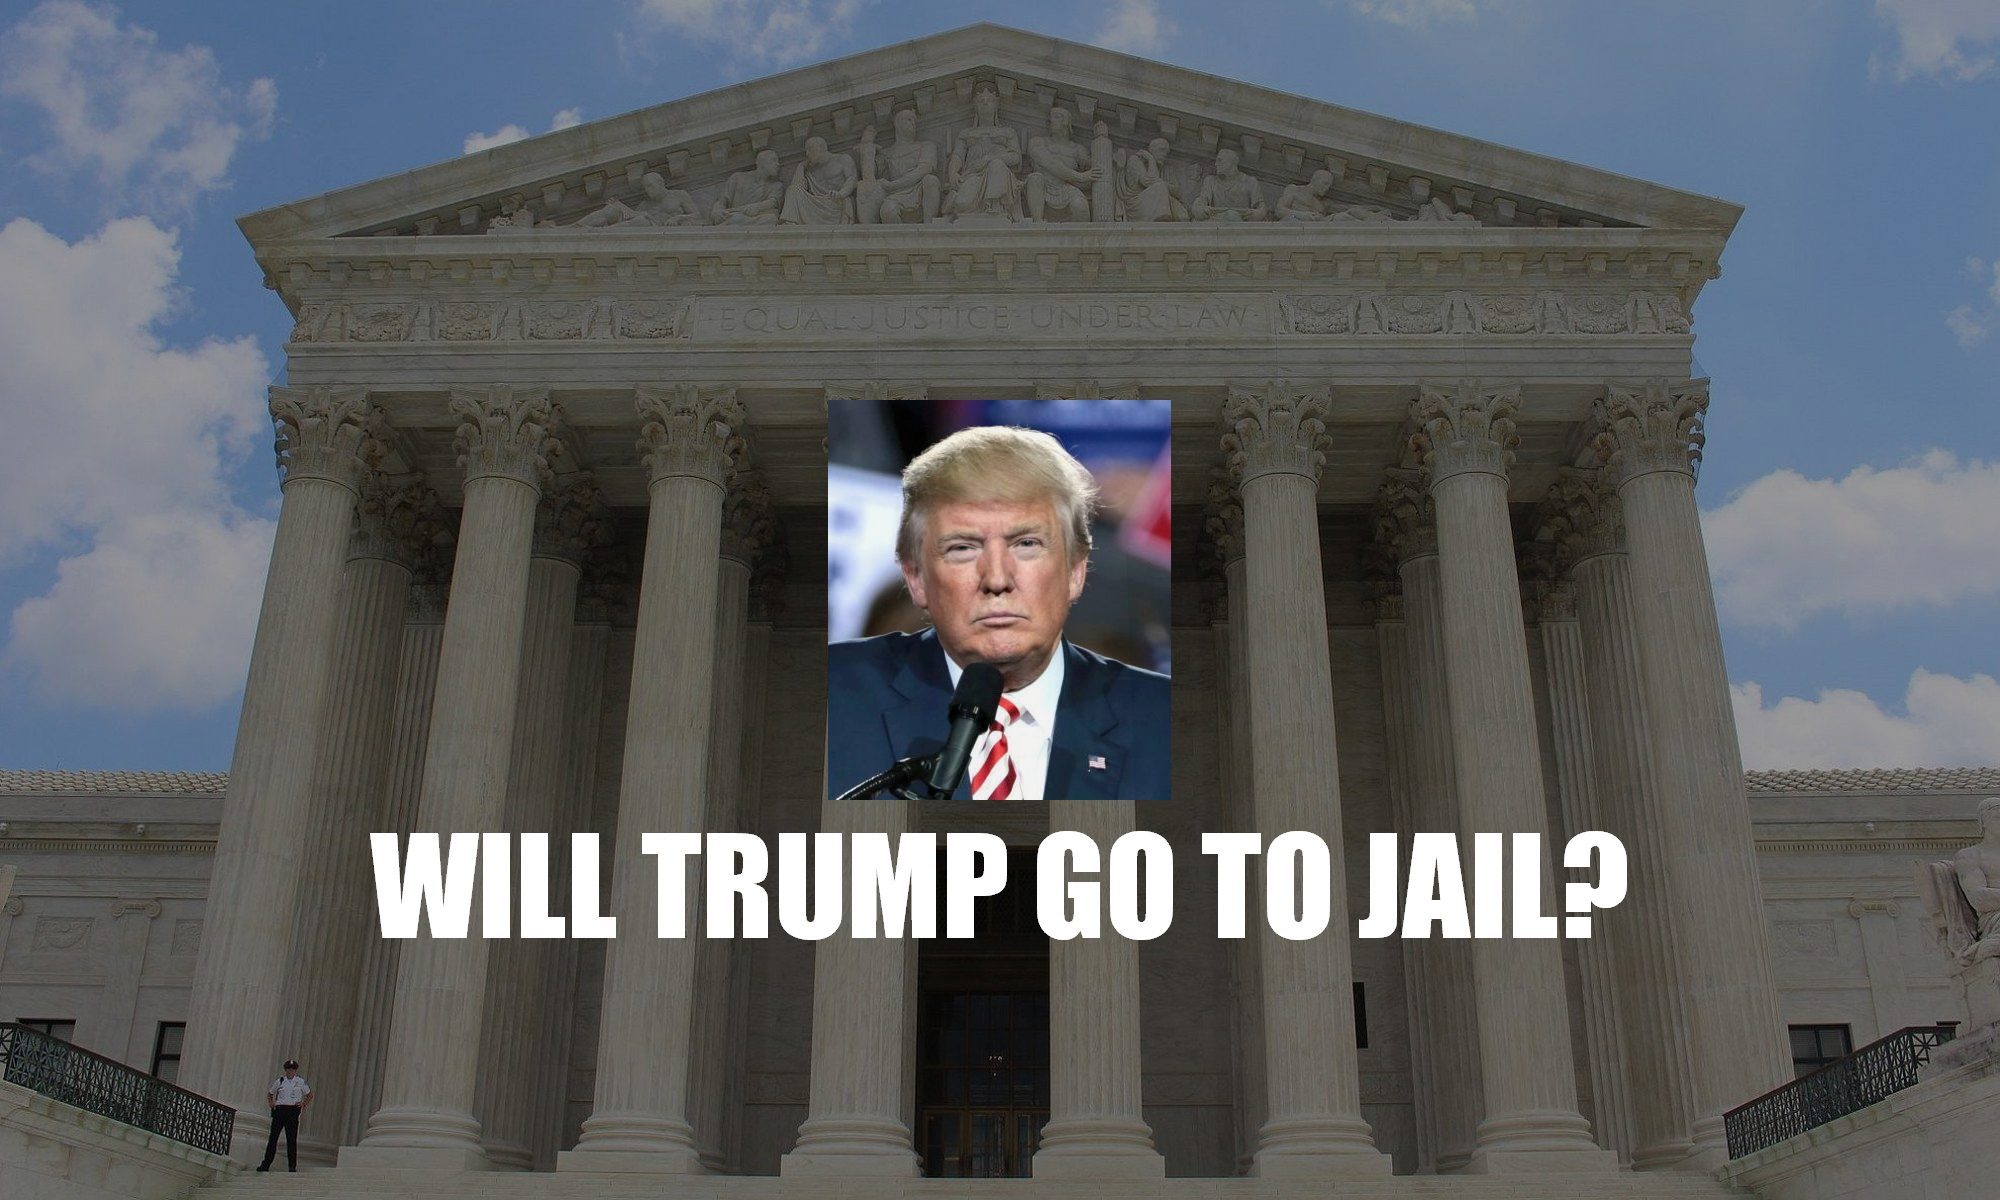 will-trump-go-to-jail-or-prison-for-january-6th-equal-under-the-law